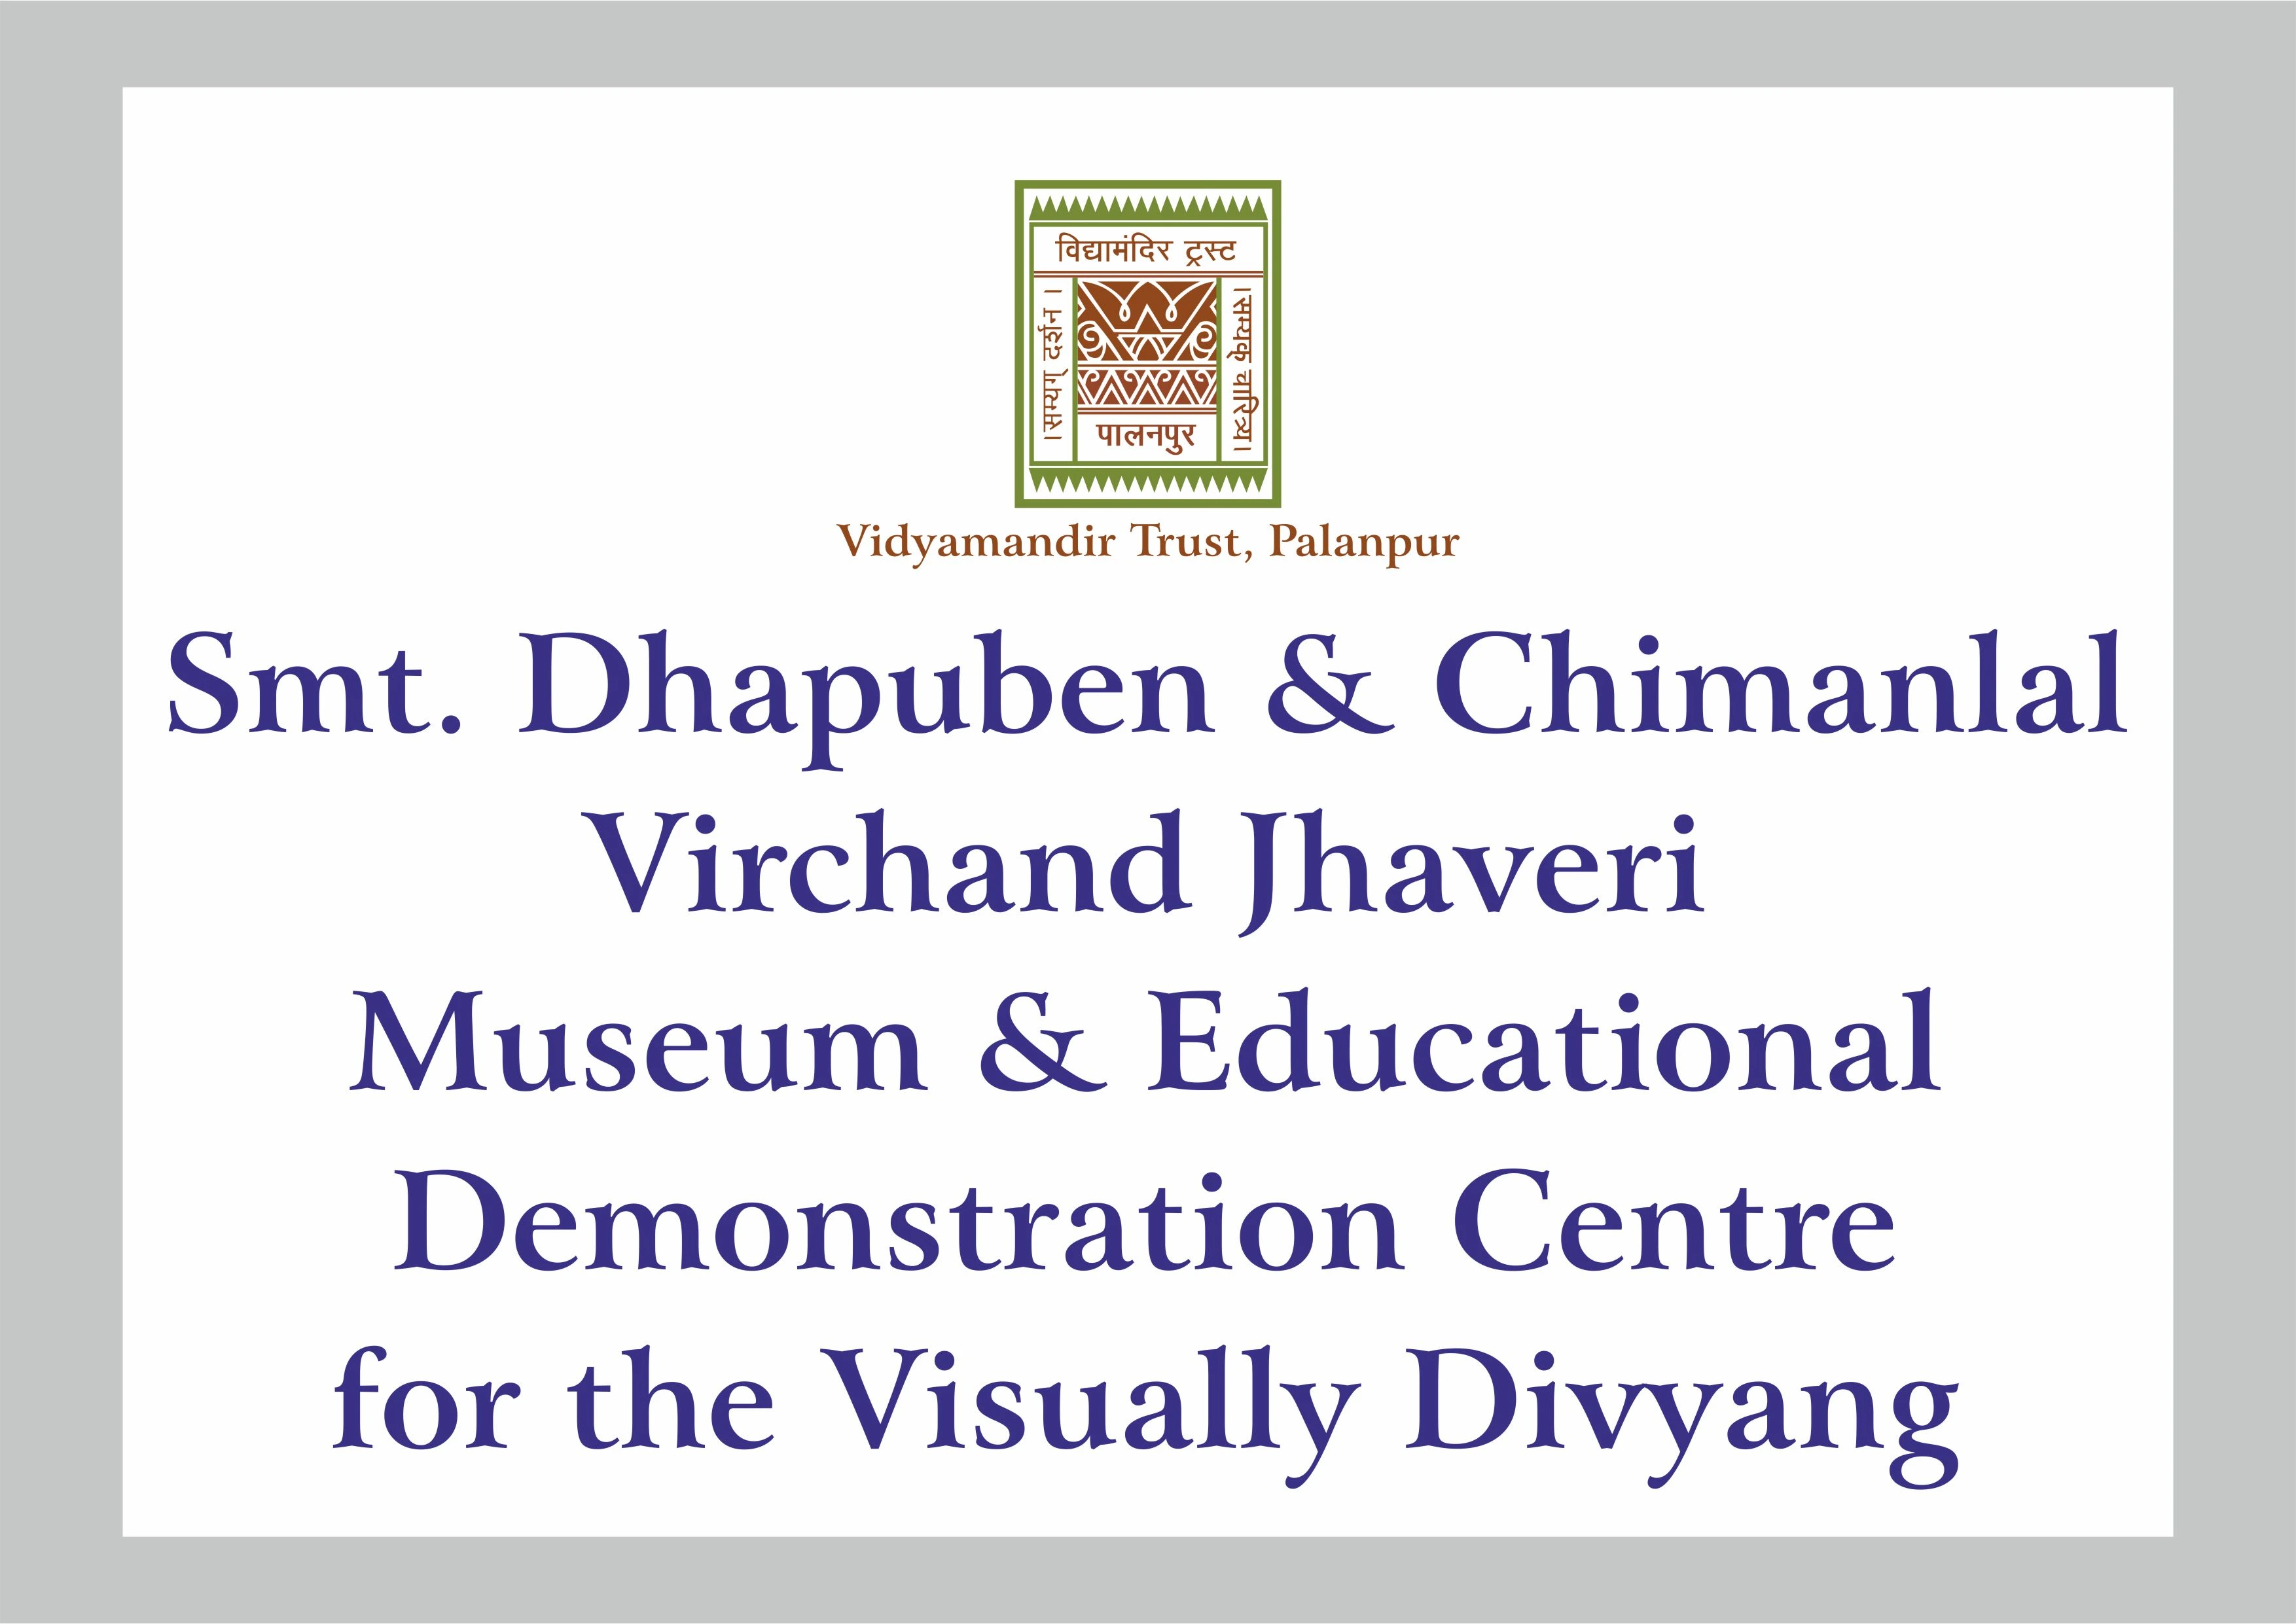 Smt. Dhapuben & Chimanlal Virchand Jhaveri Museum & Educational Demonstration Centre for the Visually Divyang - Building Photo